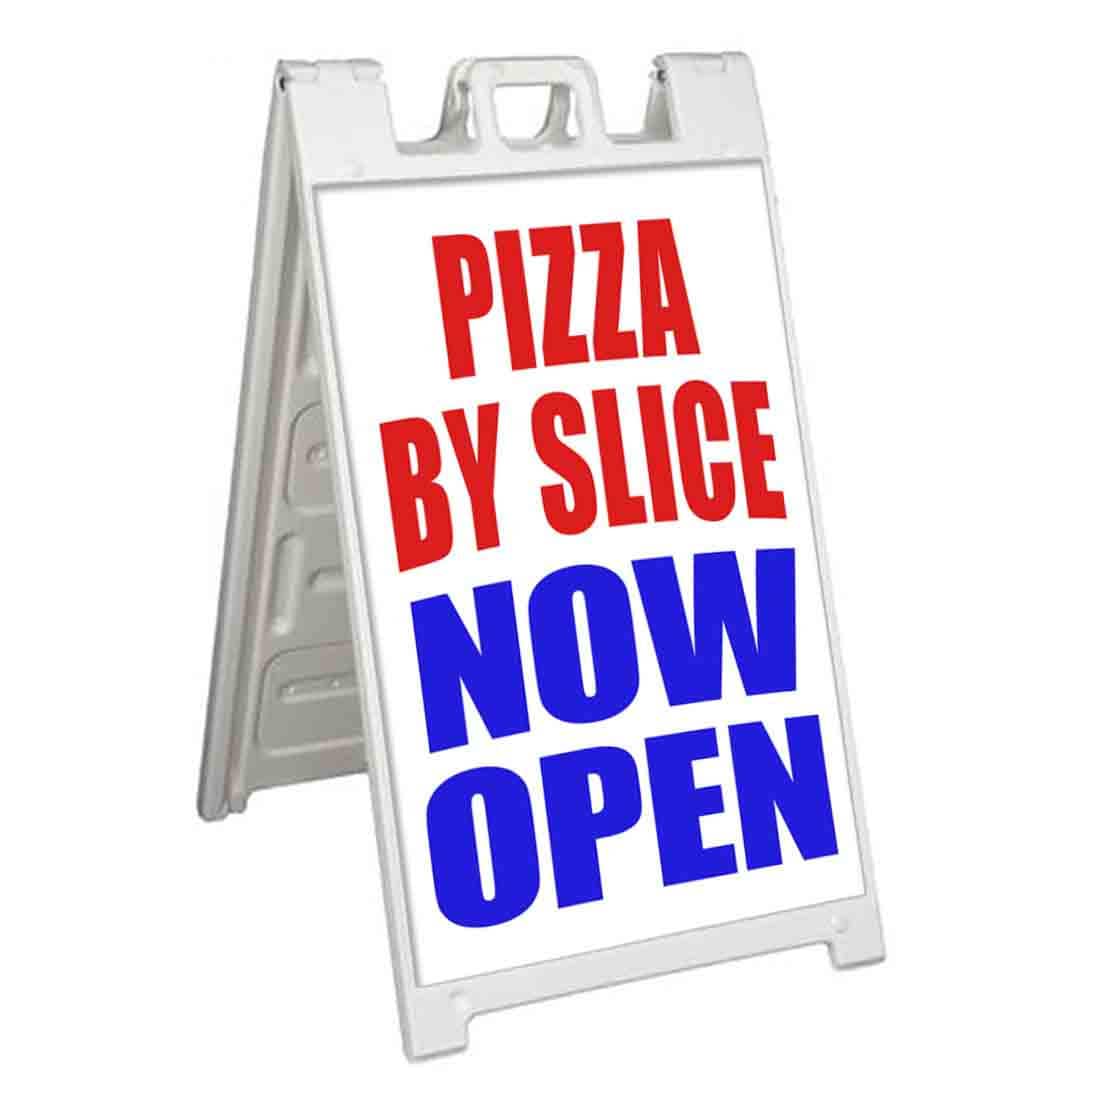 Pizza Sidewalk Sign Retail A Frame 24x36 Concession Stand Outdoor